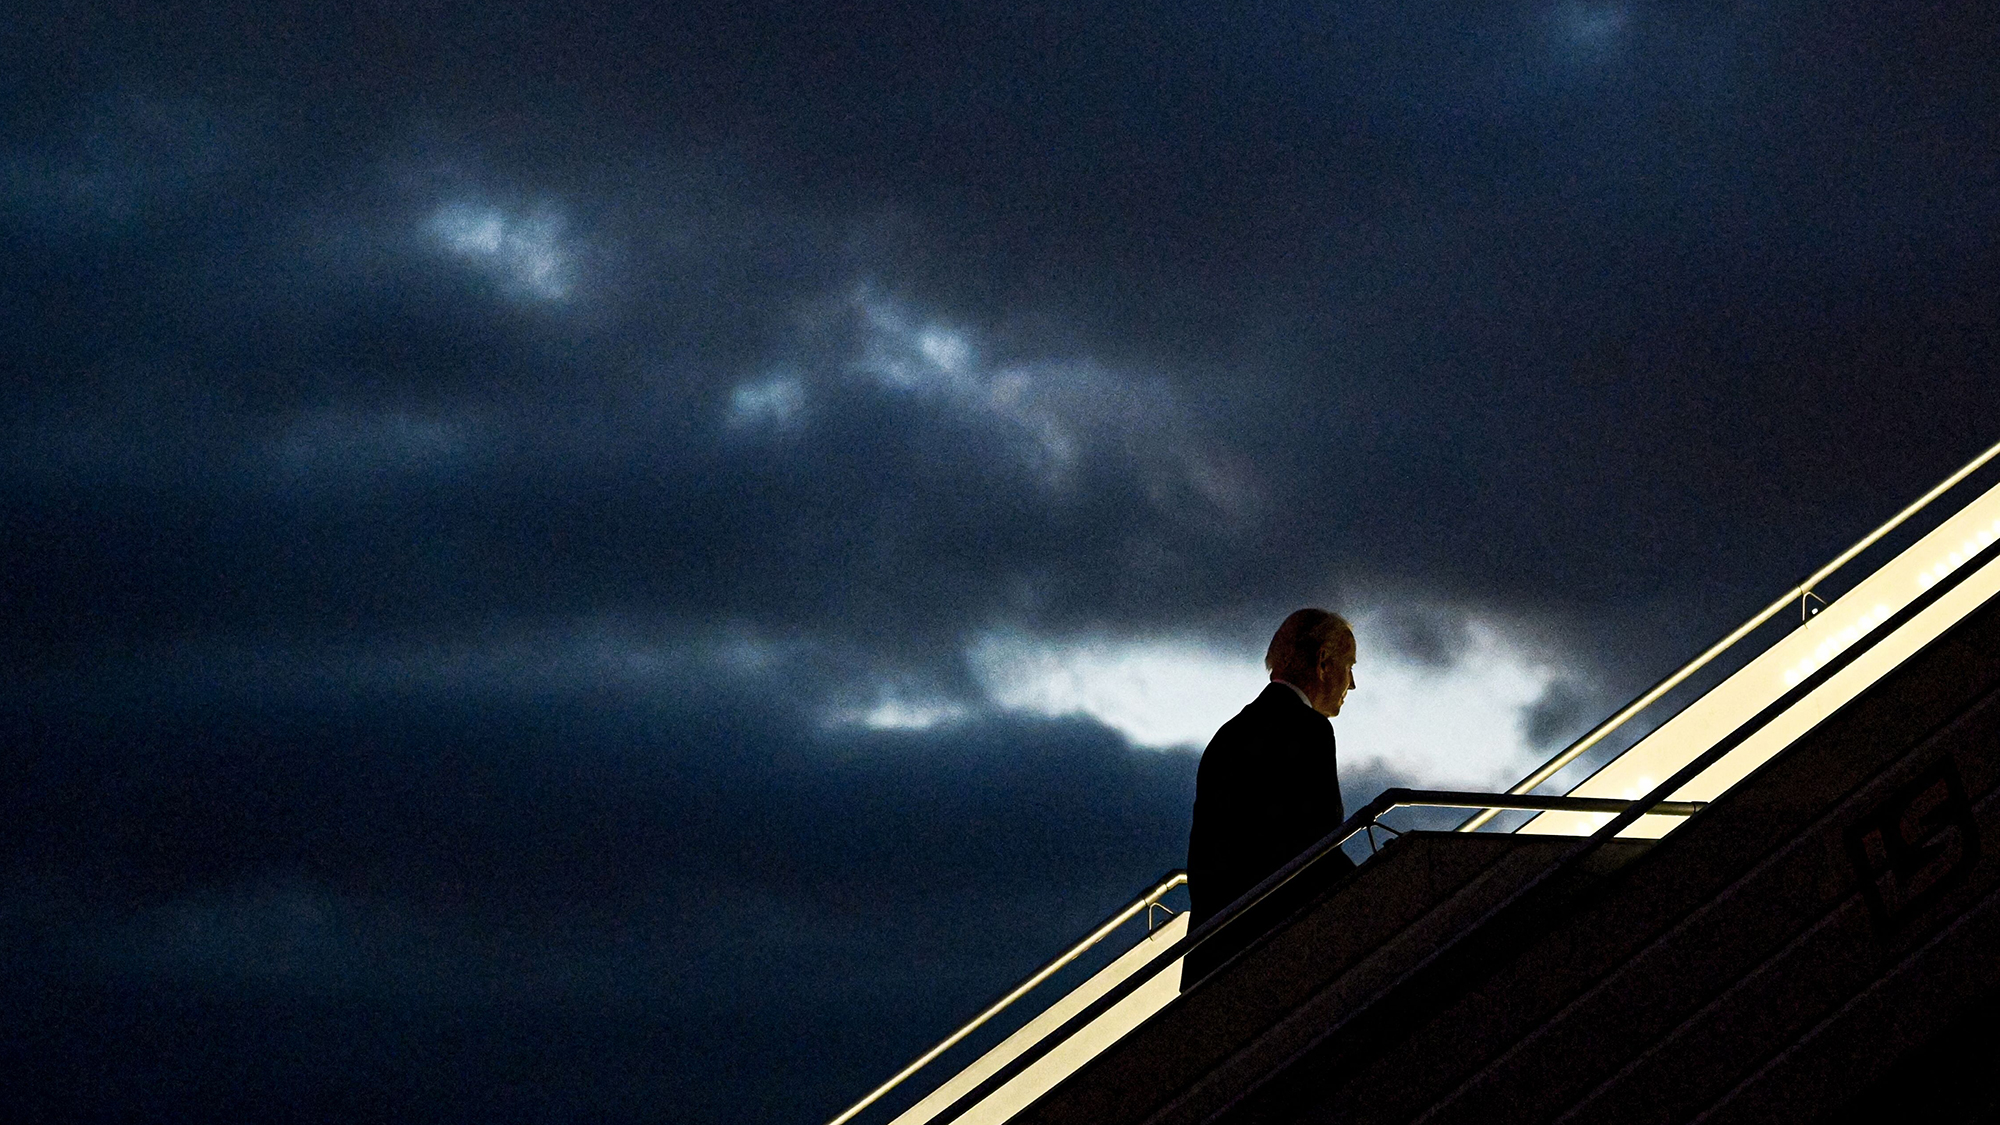 US President Joe Biden boards Air Force One before departing Warsaw Chopin Airport in Warsaw on February 22.